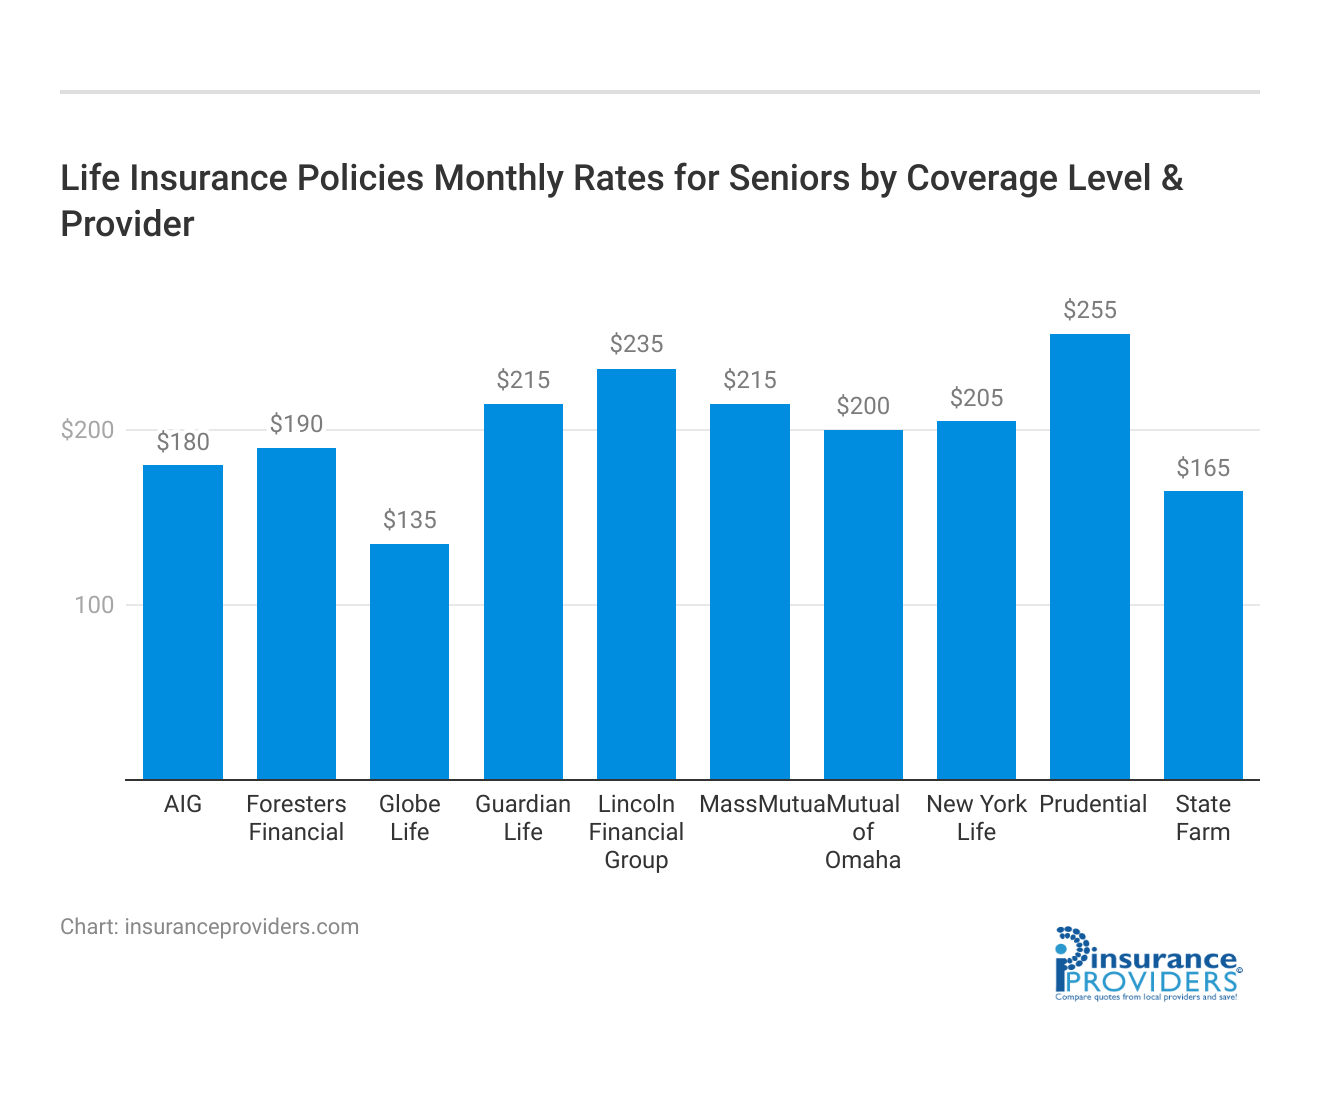 <h3>Life Insurance Policies Monthly Rates for Seniors by Coverage Level & Provider</h3>